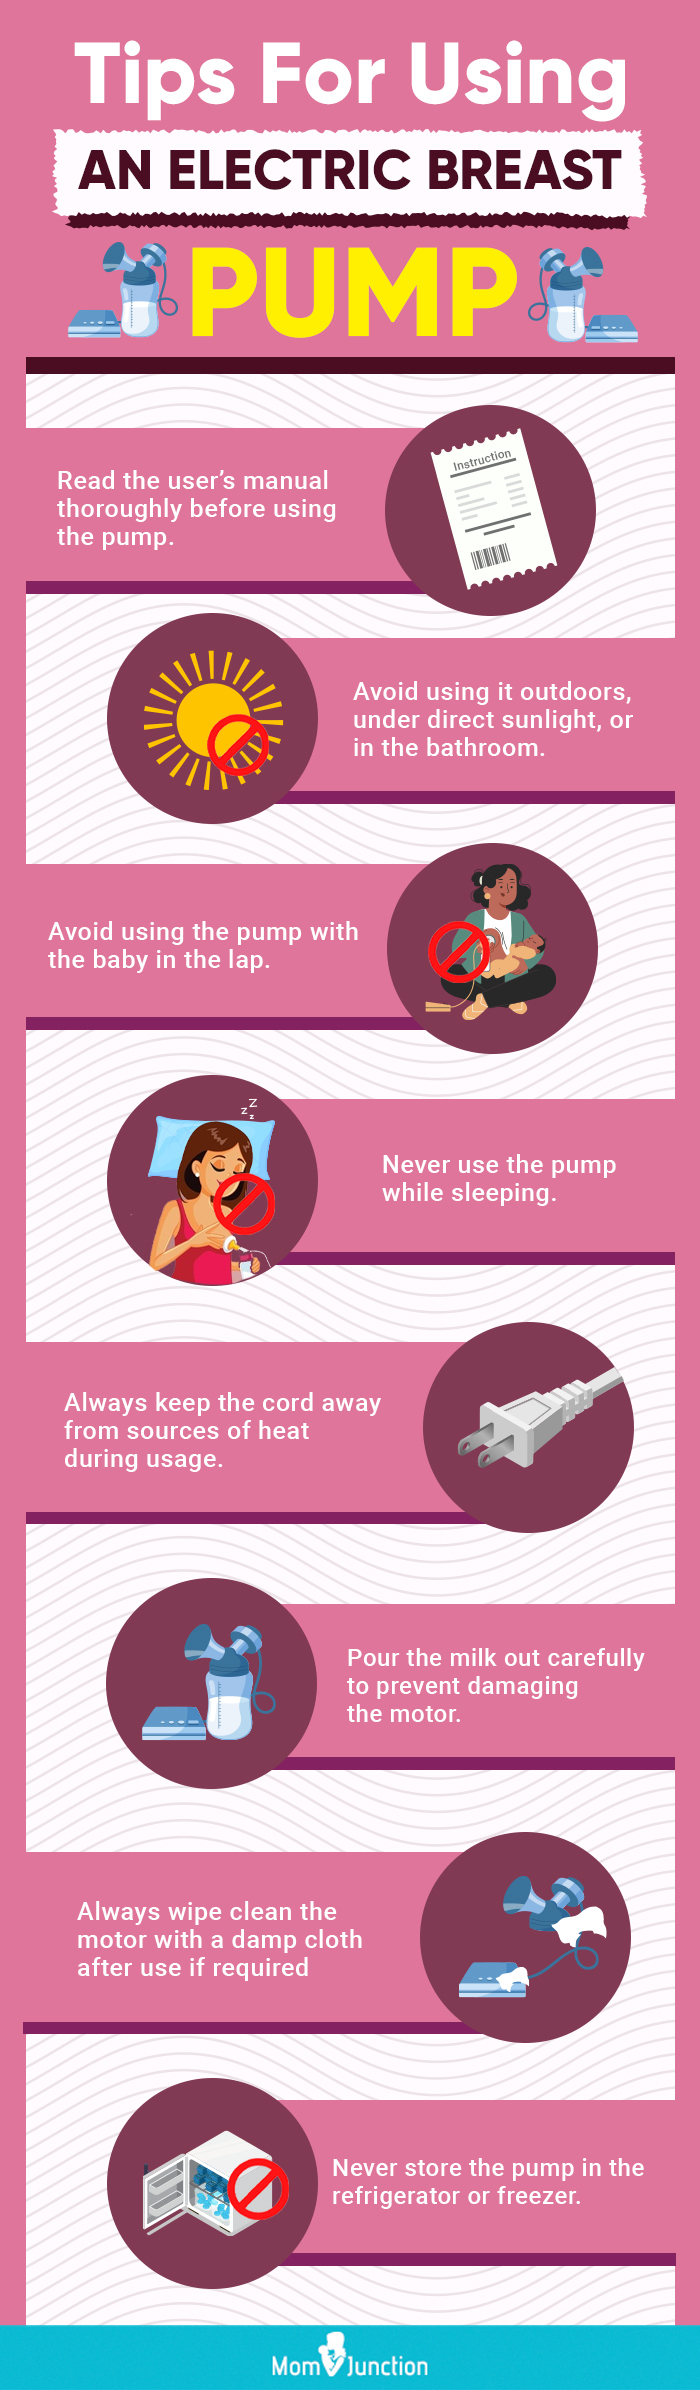 Tips For Using An Electric Breast Pump (infographic)